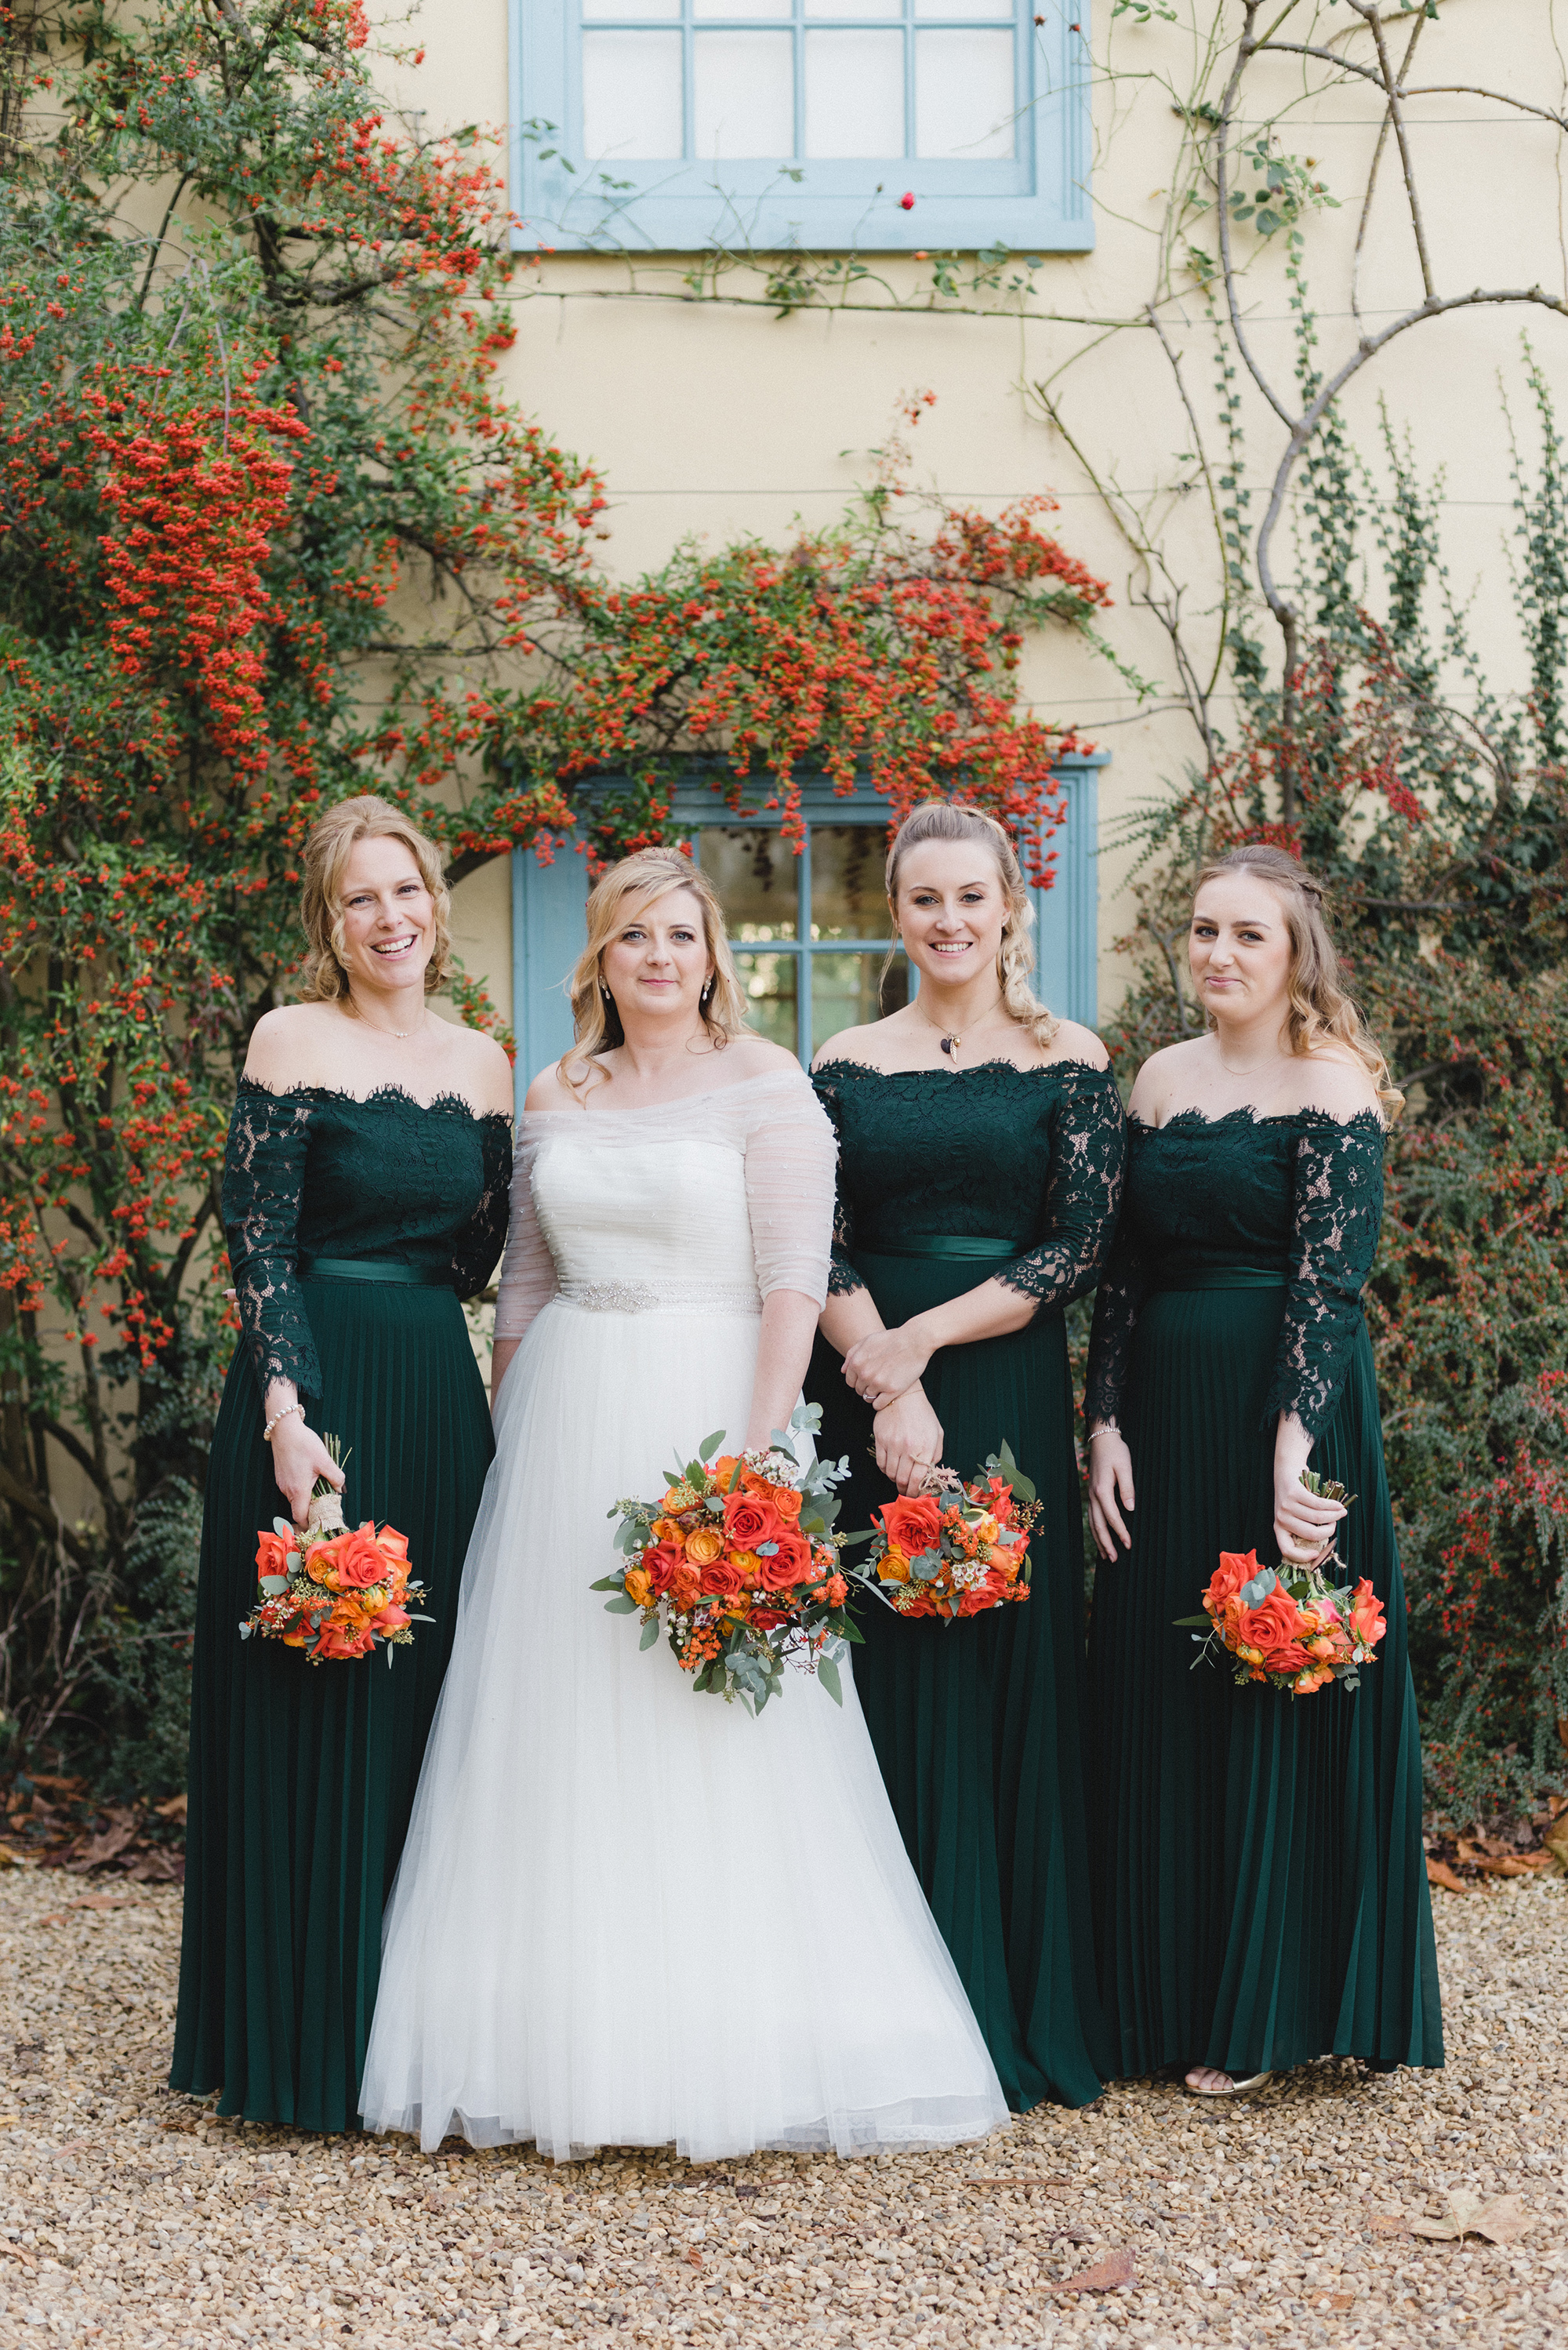 Bride wearing La Sposa and maids in bottle green Coast pleated dresses